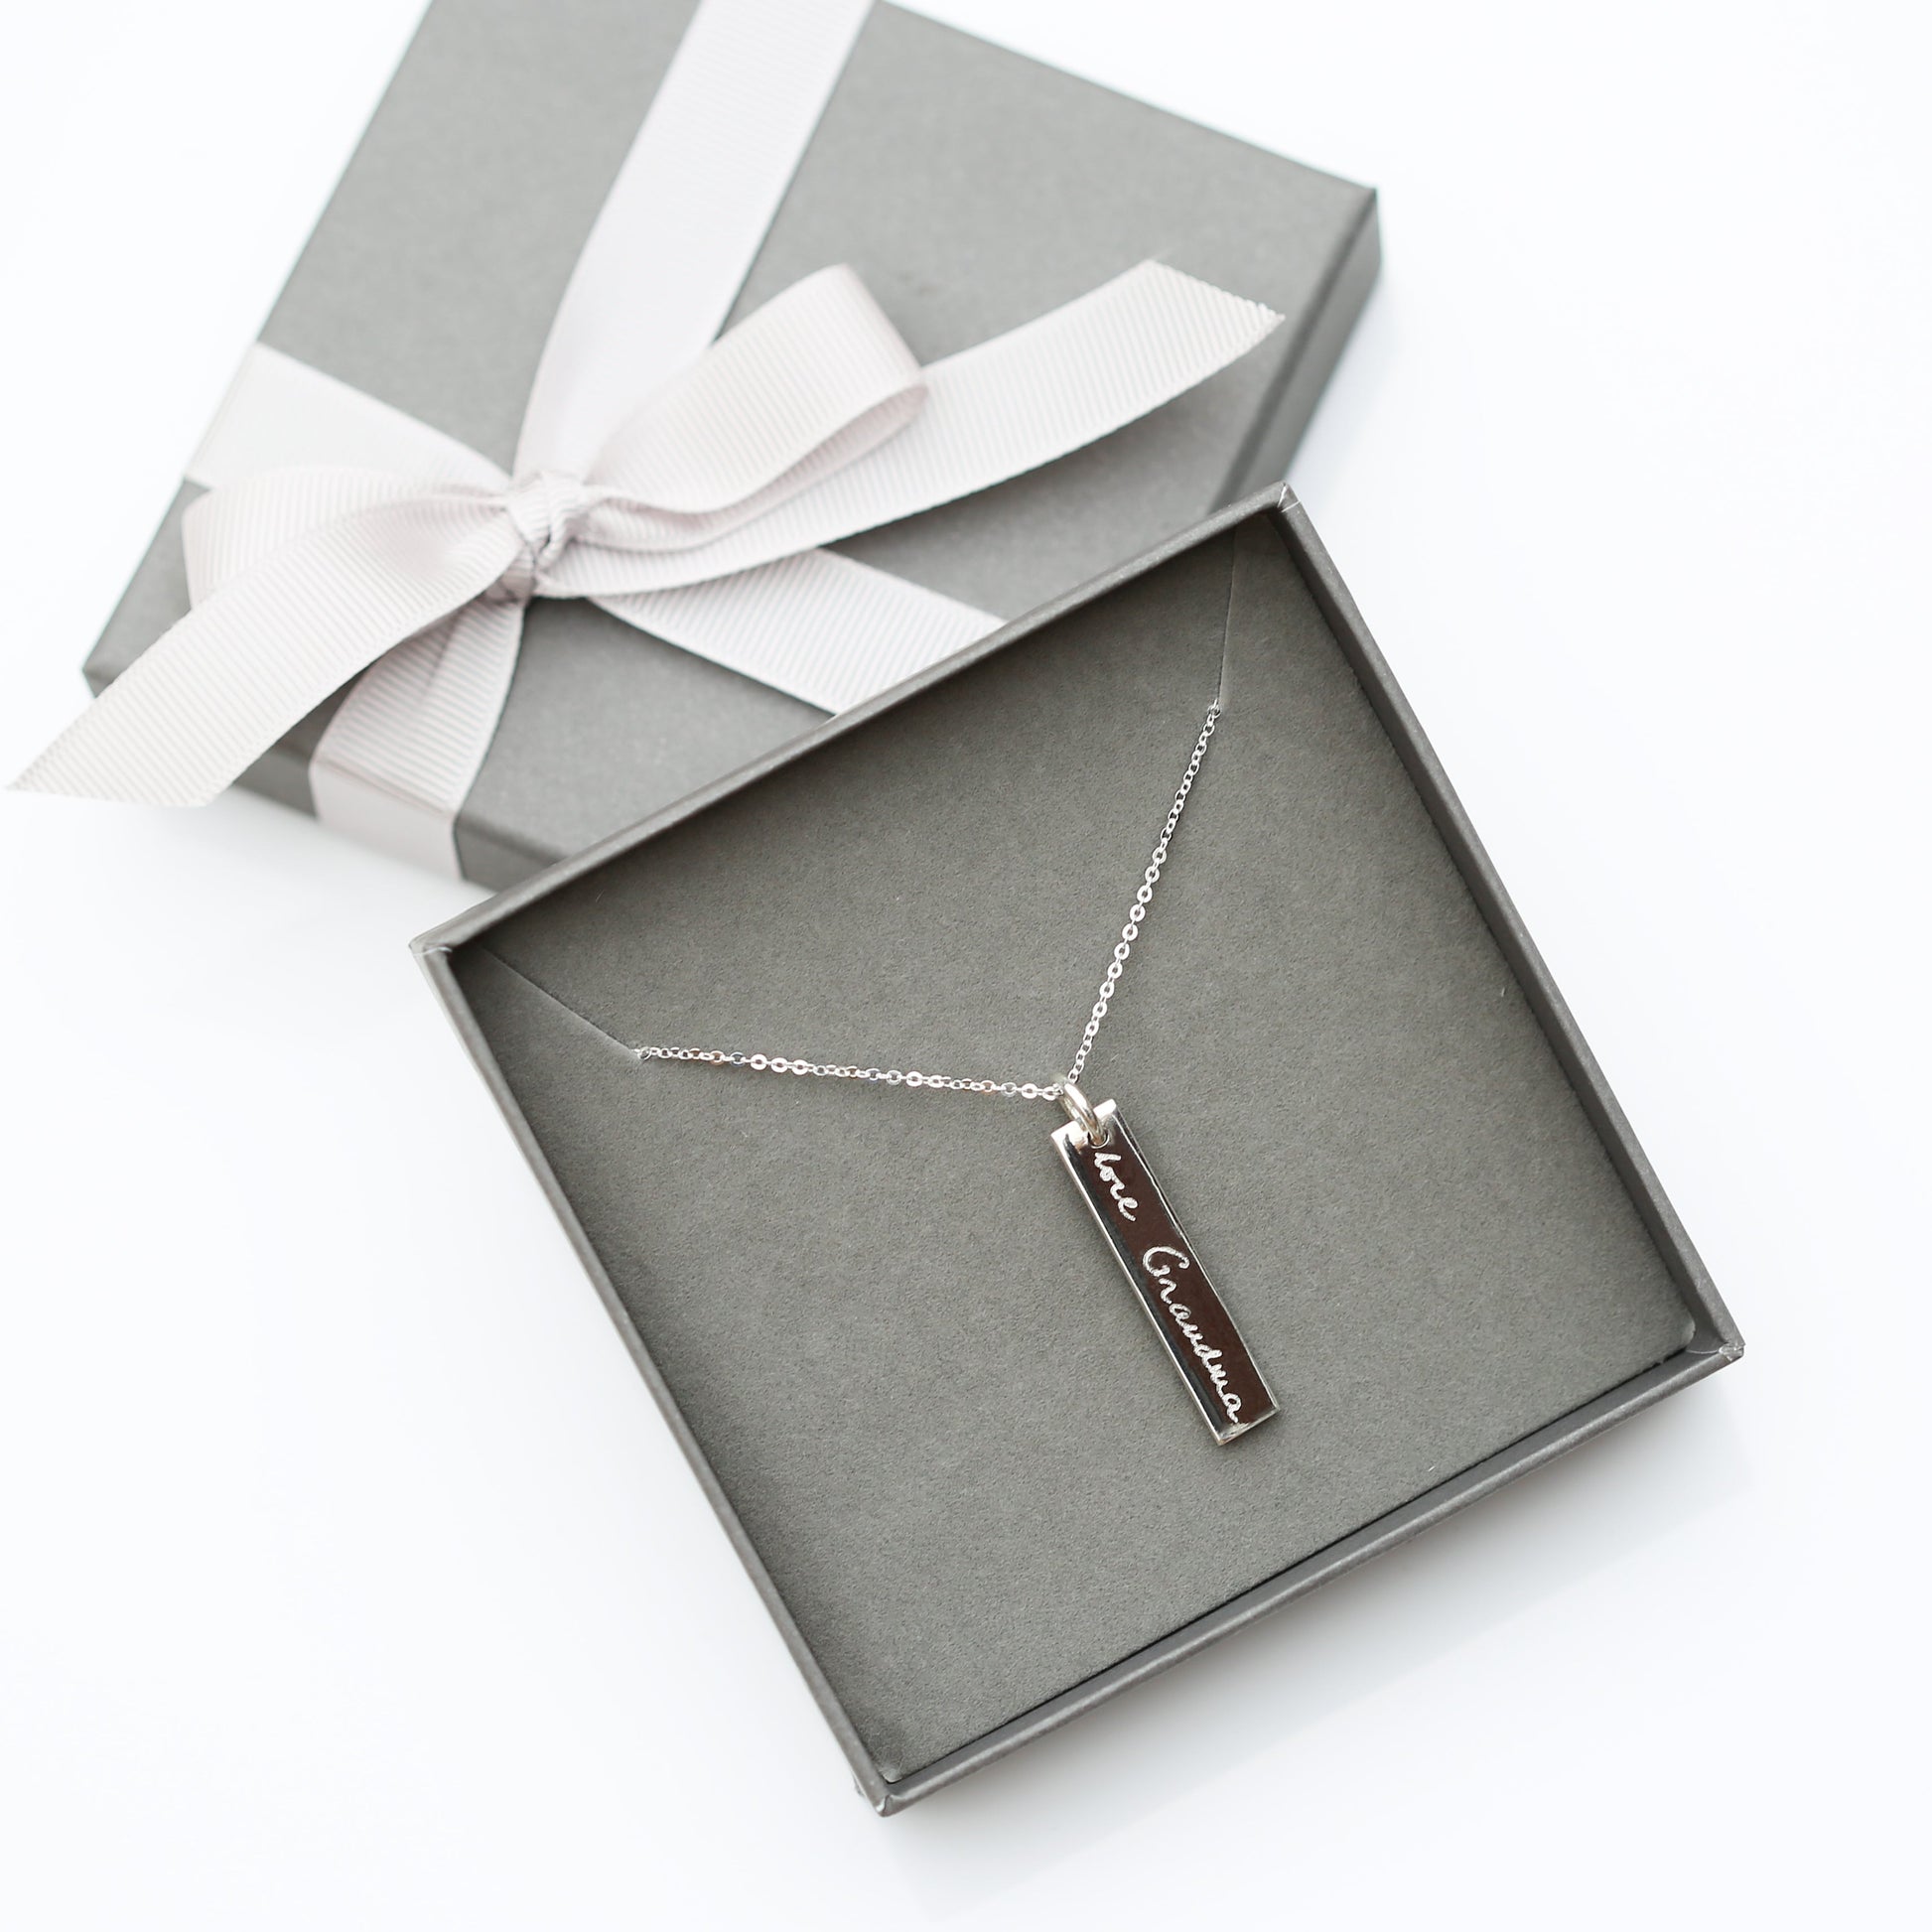 Personalized Necklaces - Sterling Silver Bar Necklace - Actual Handwriting 